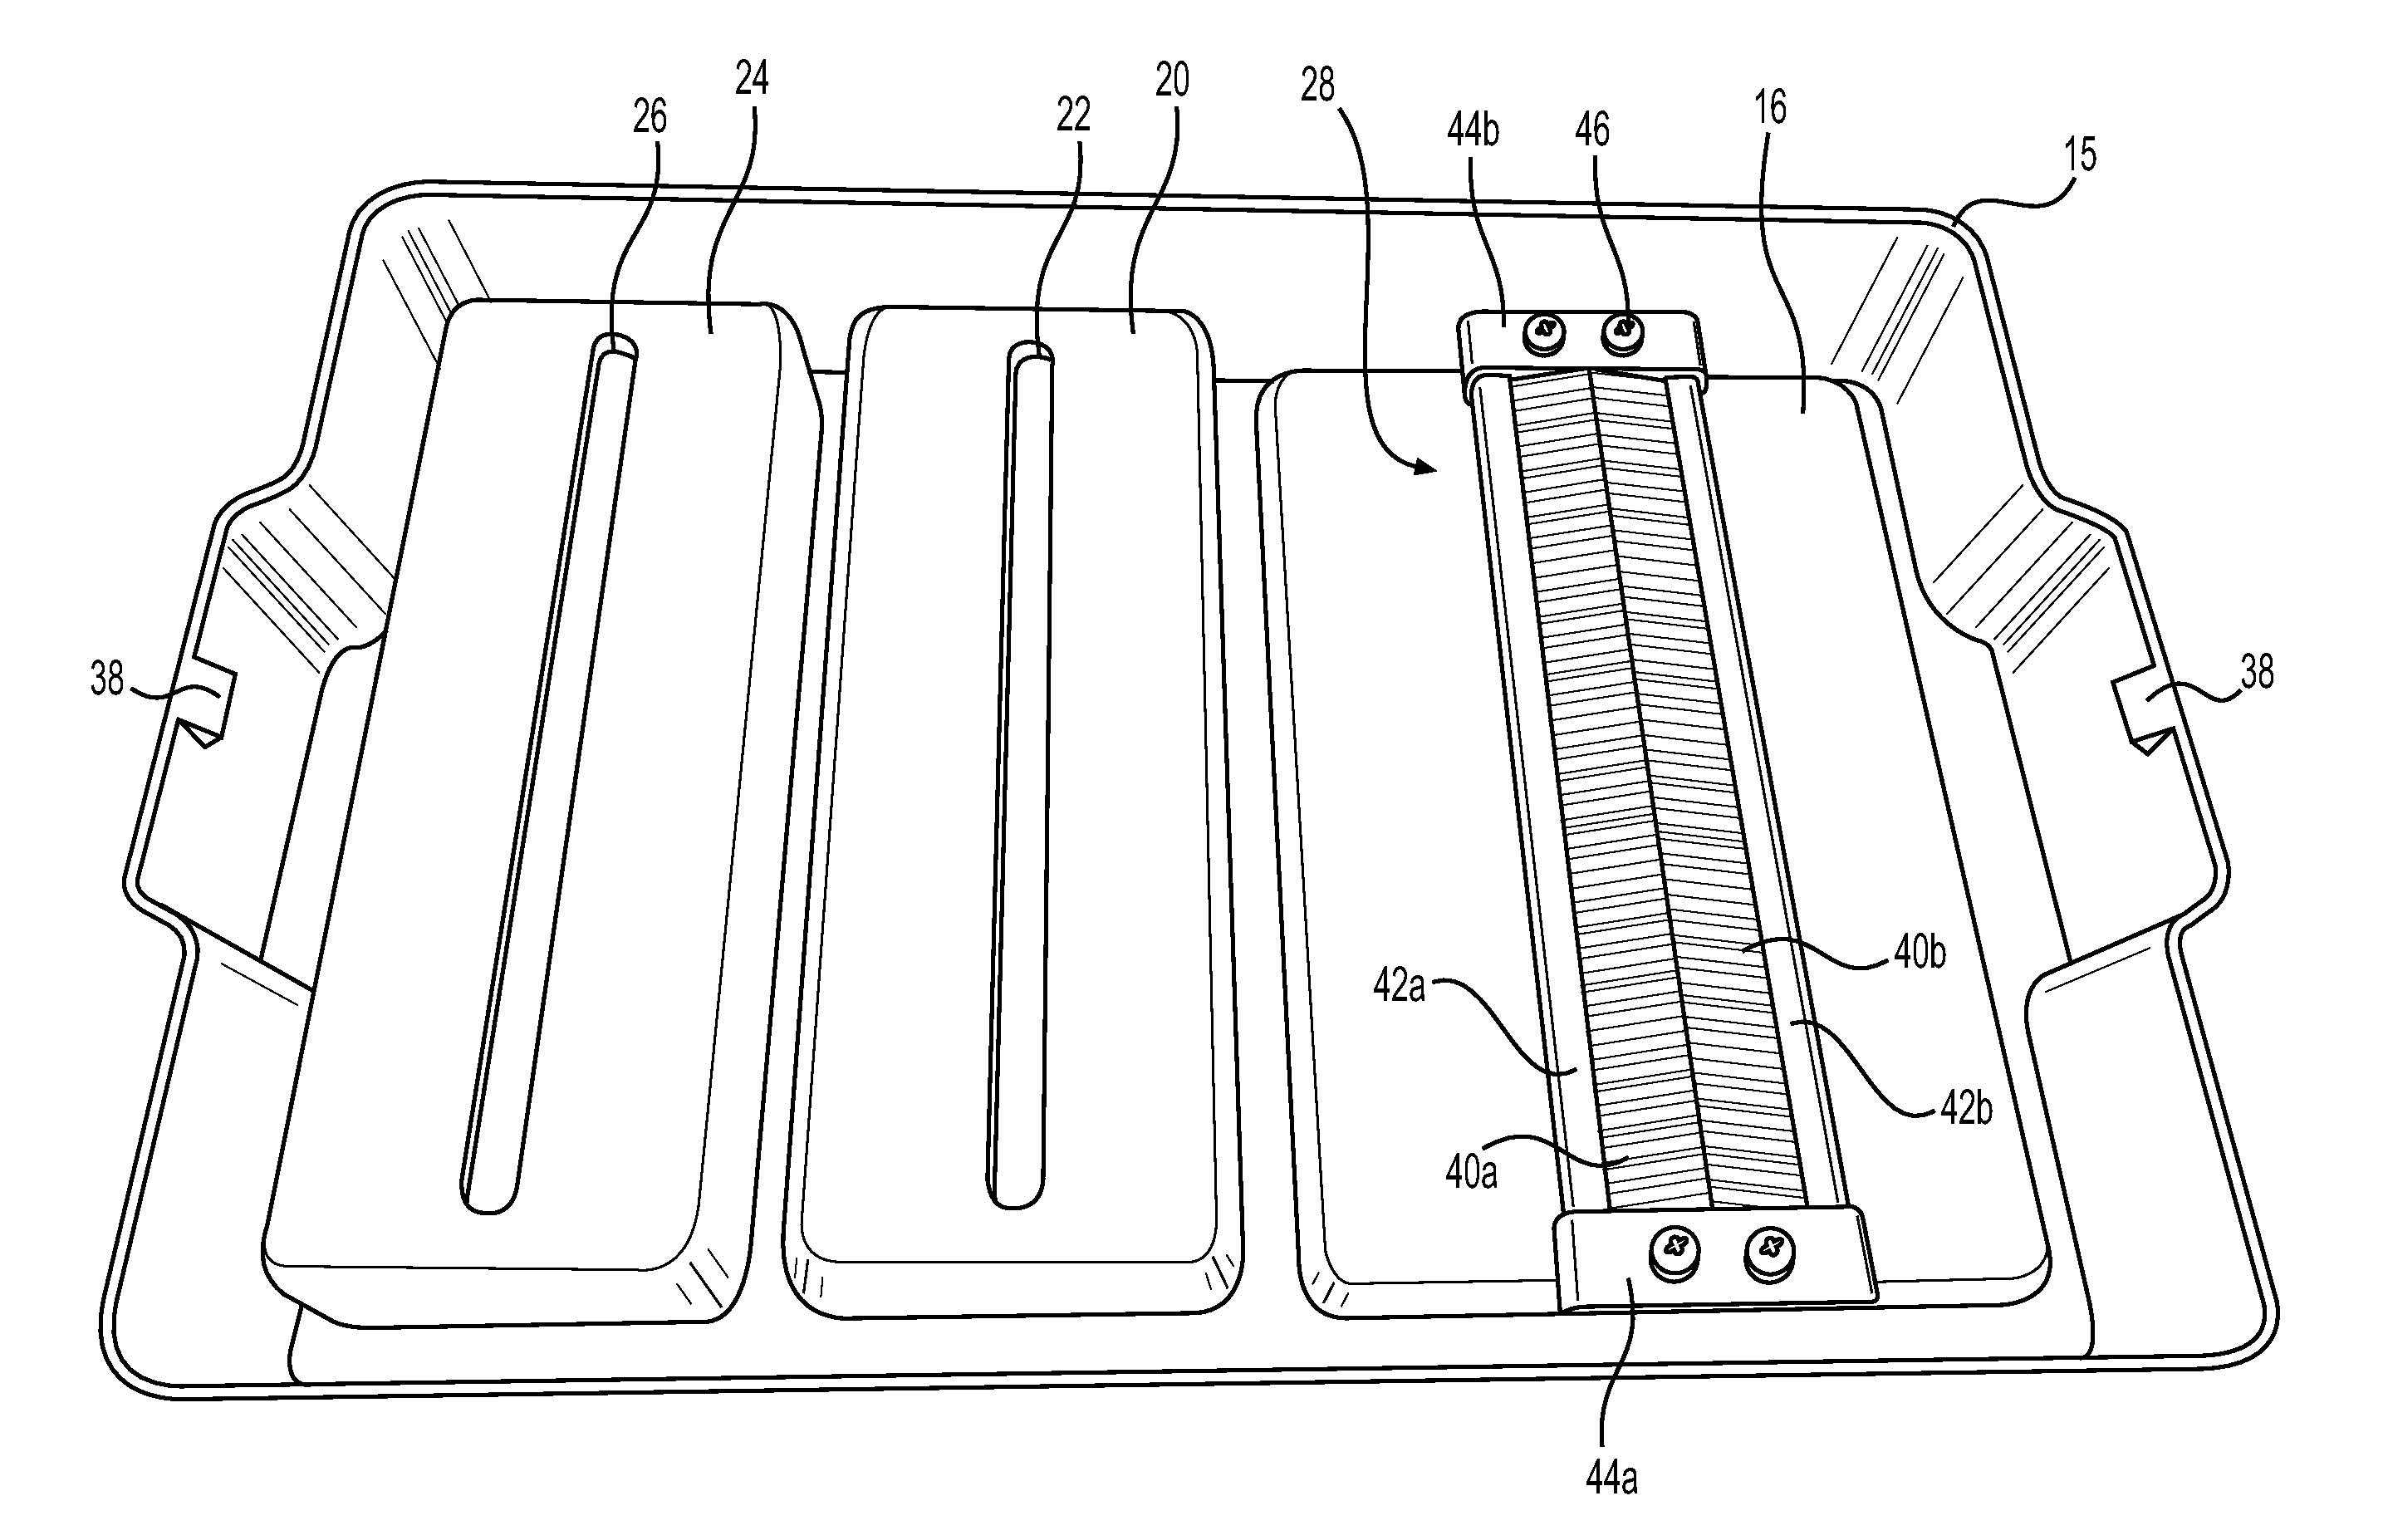 Utensil cleaning device and method